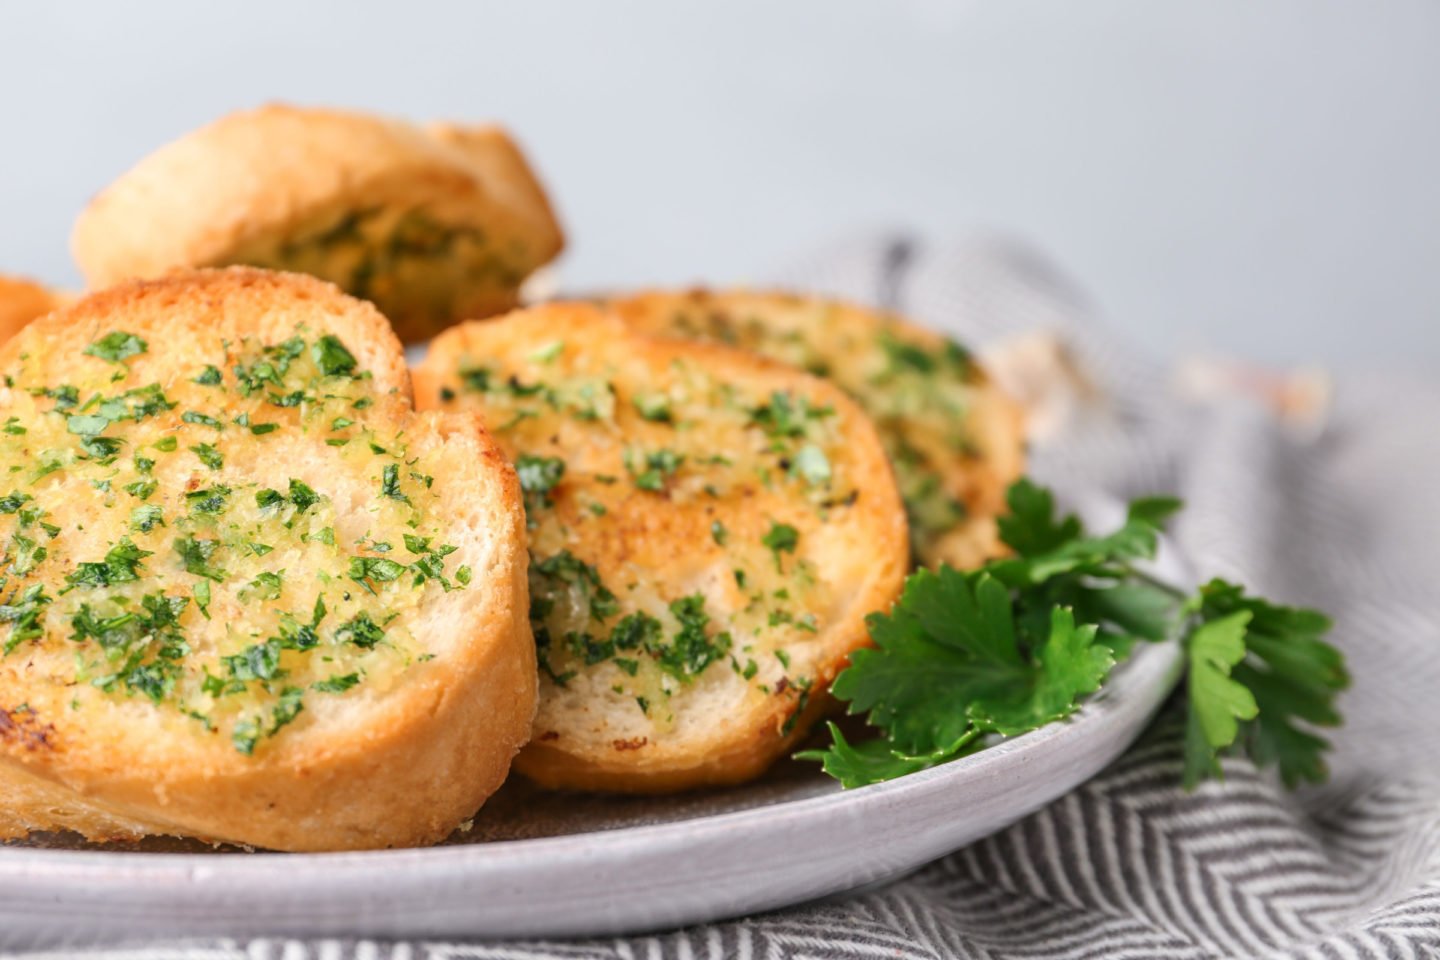 slices of toasted bread topped with garlic confit and herbs